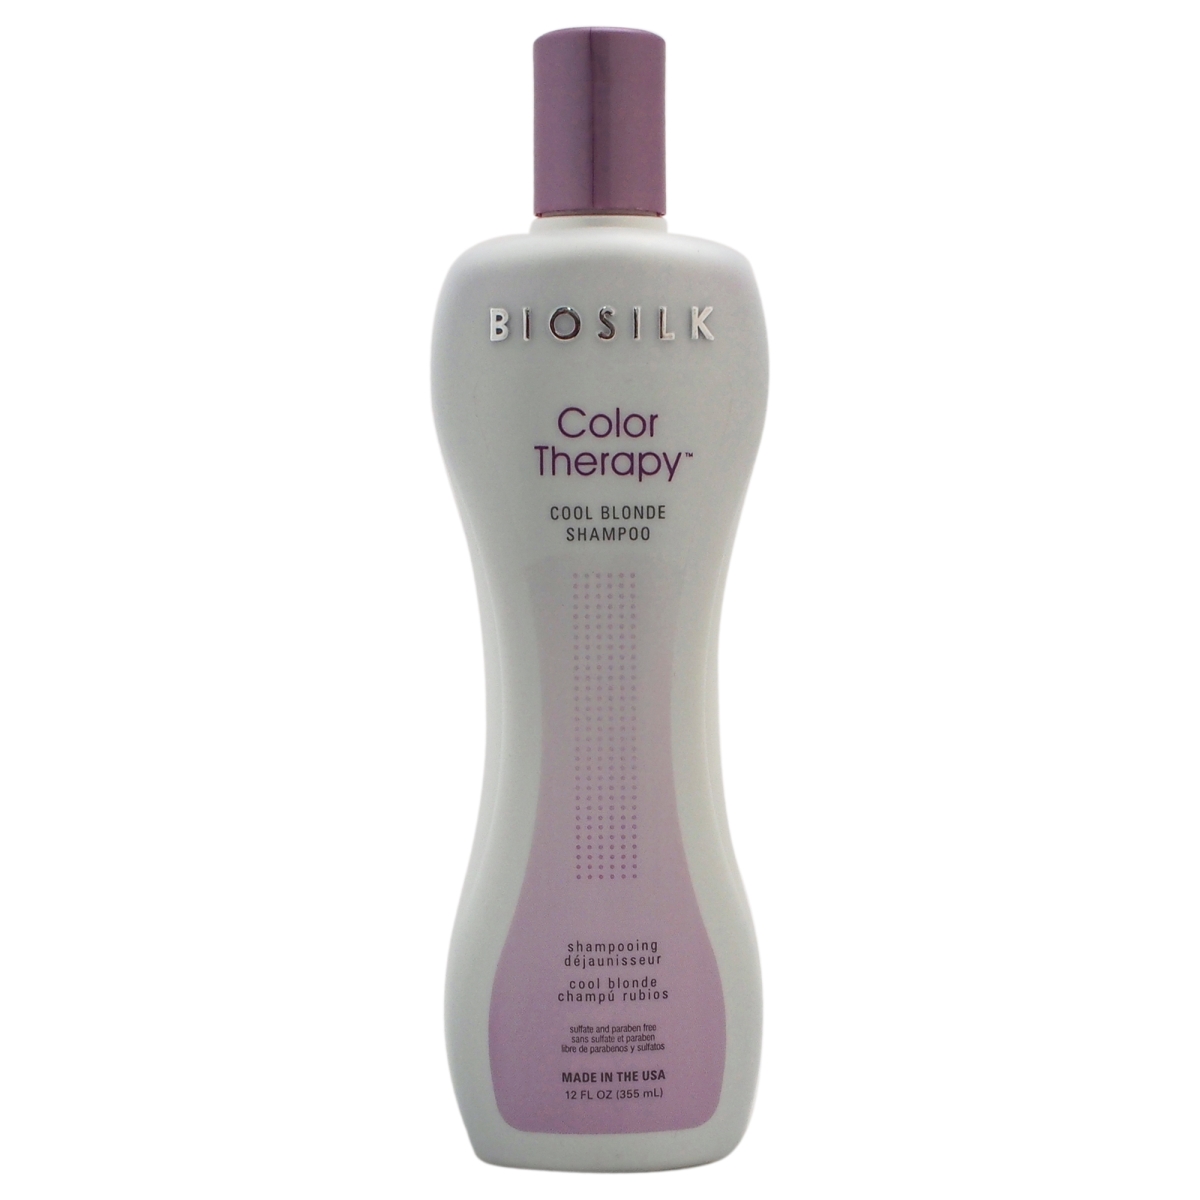 K U-hc-11038 Color Therapy Cool Blonde Shampoo For Unisex - 12 Oz